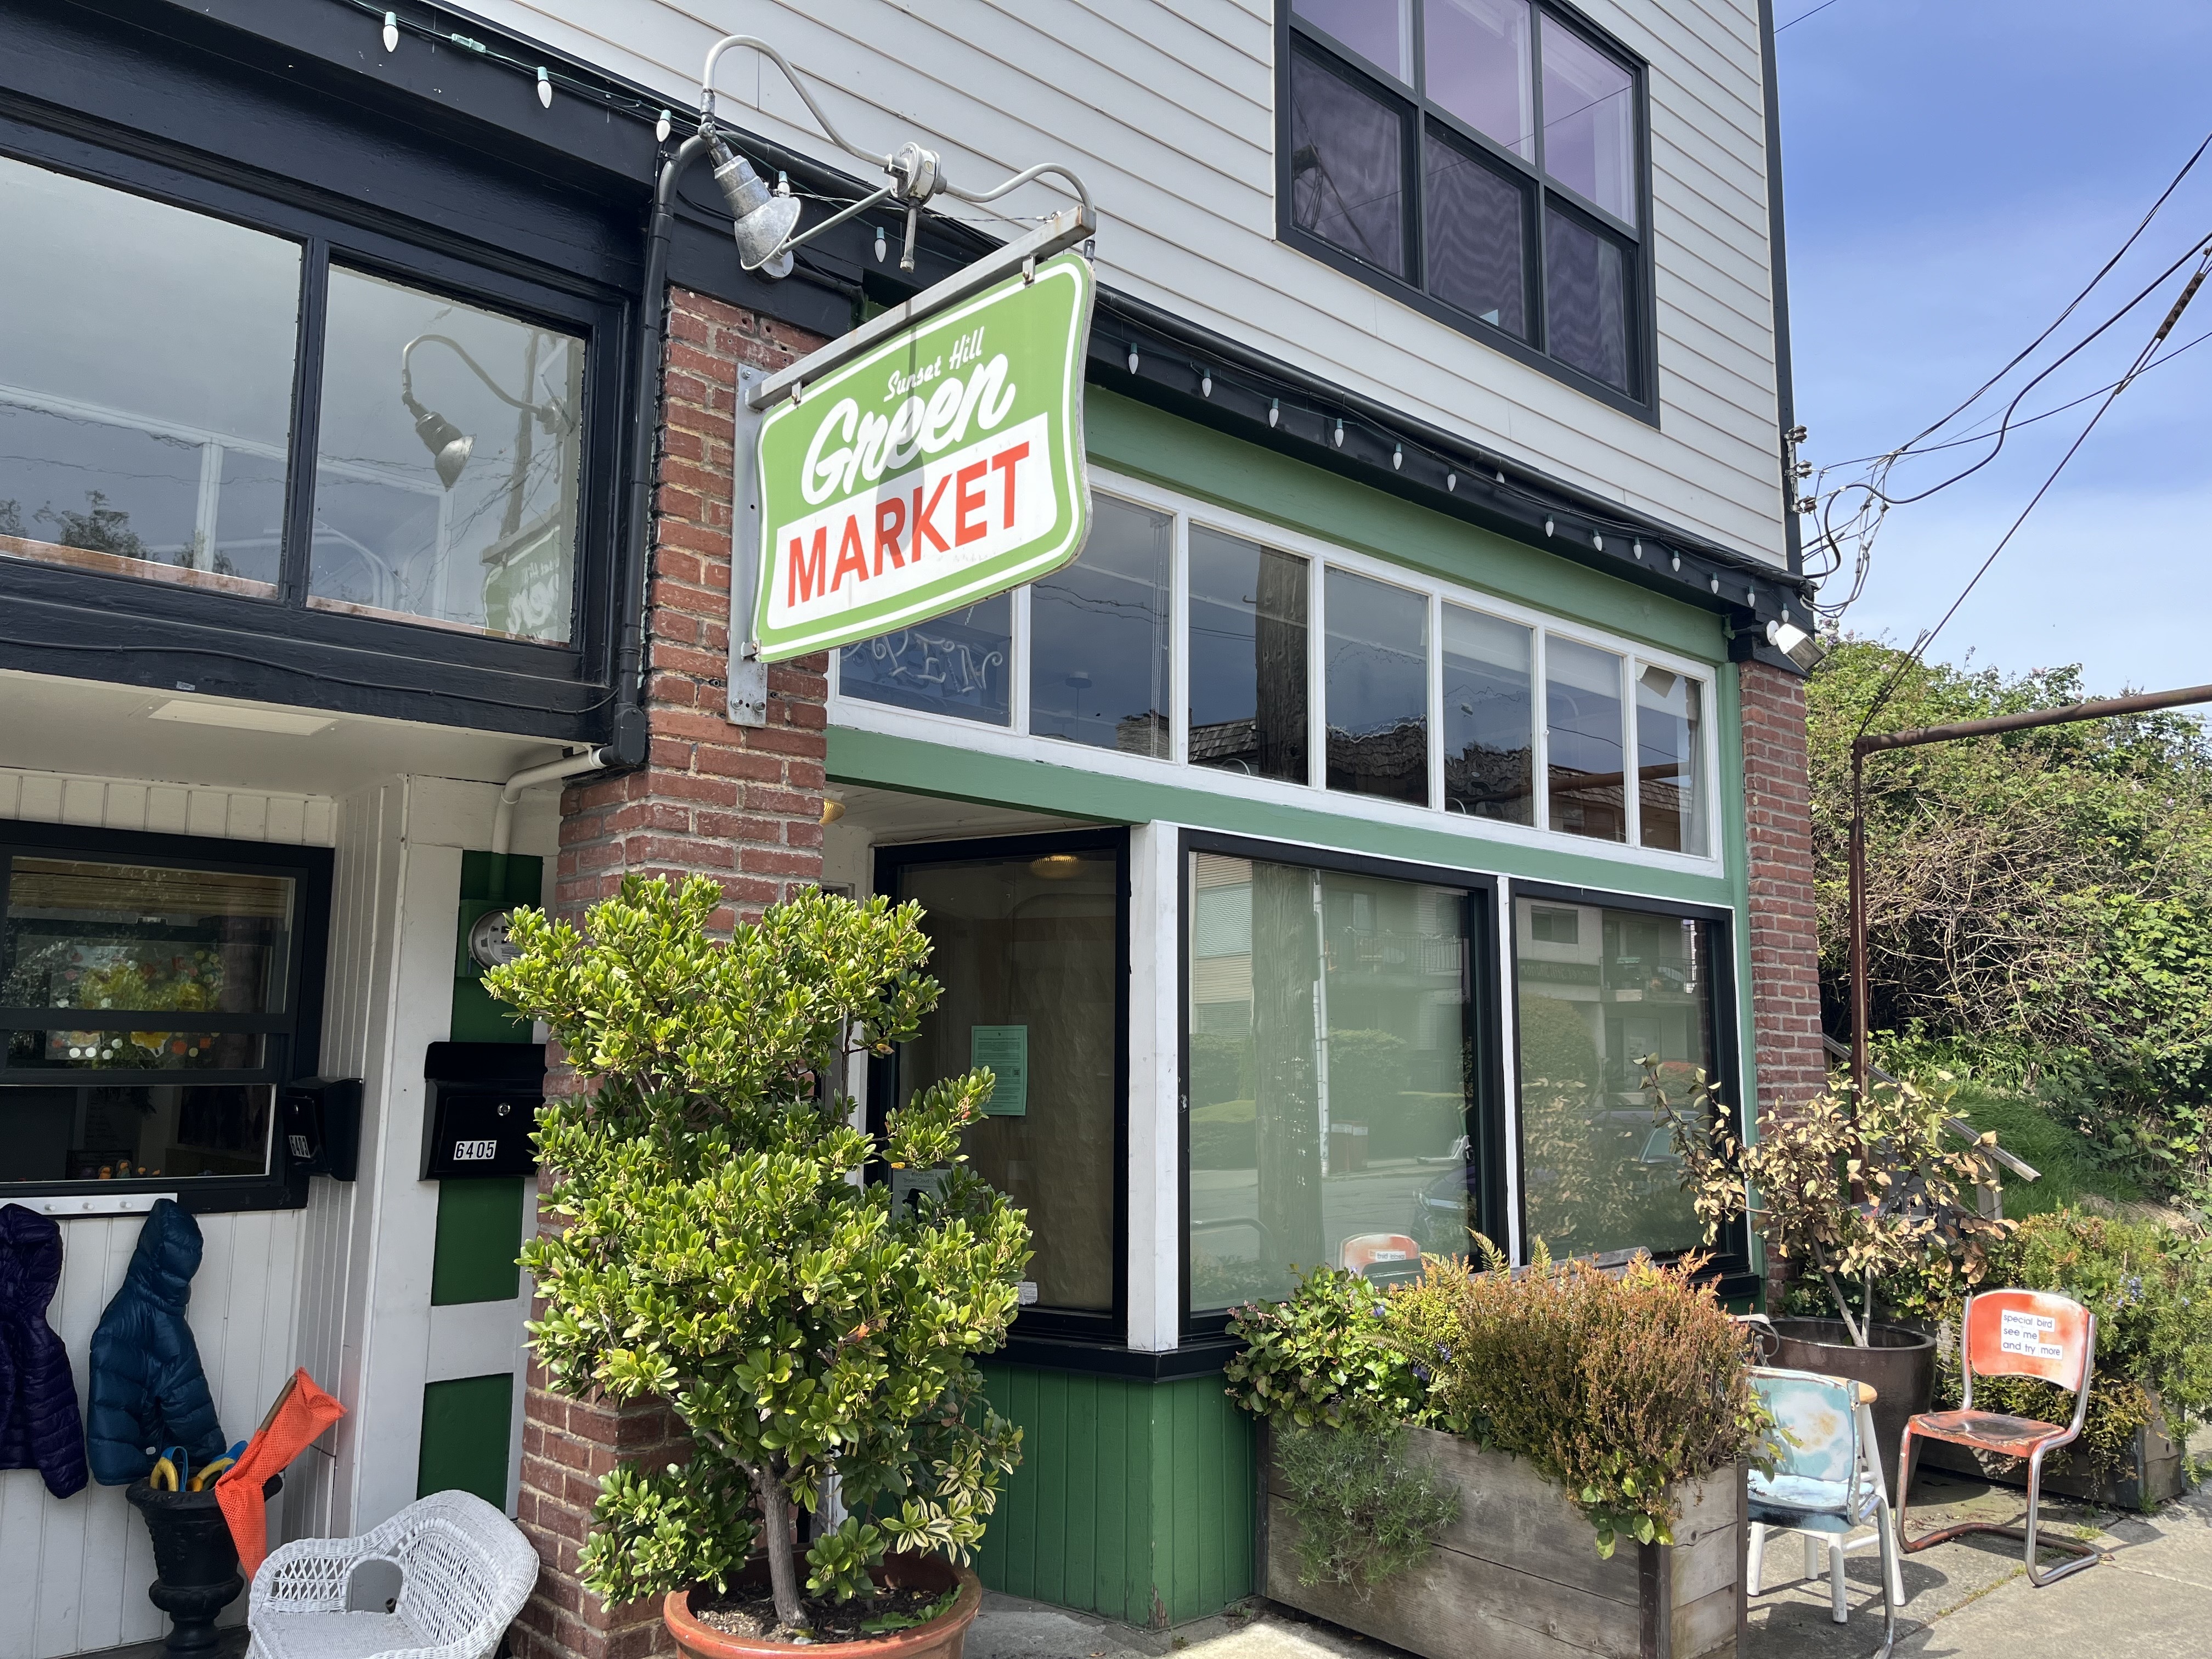 A storefront with a sign that reads “Green Market.”